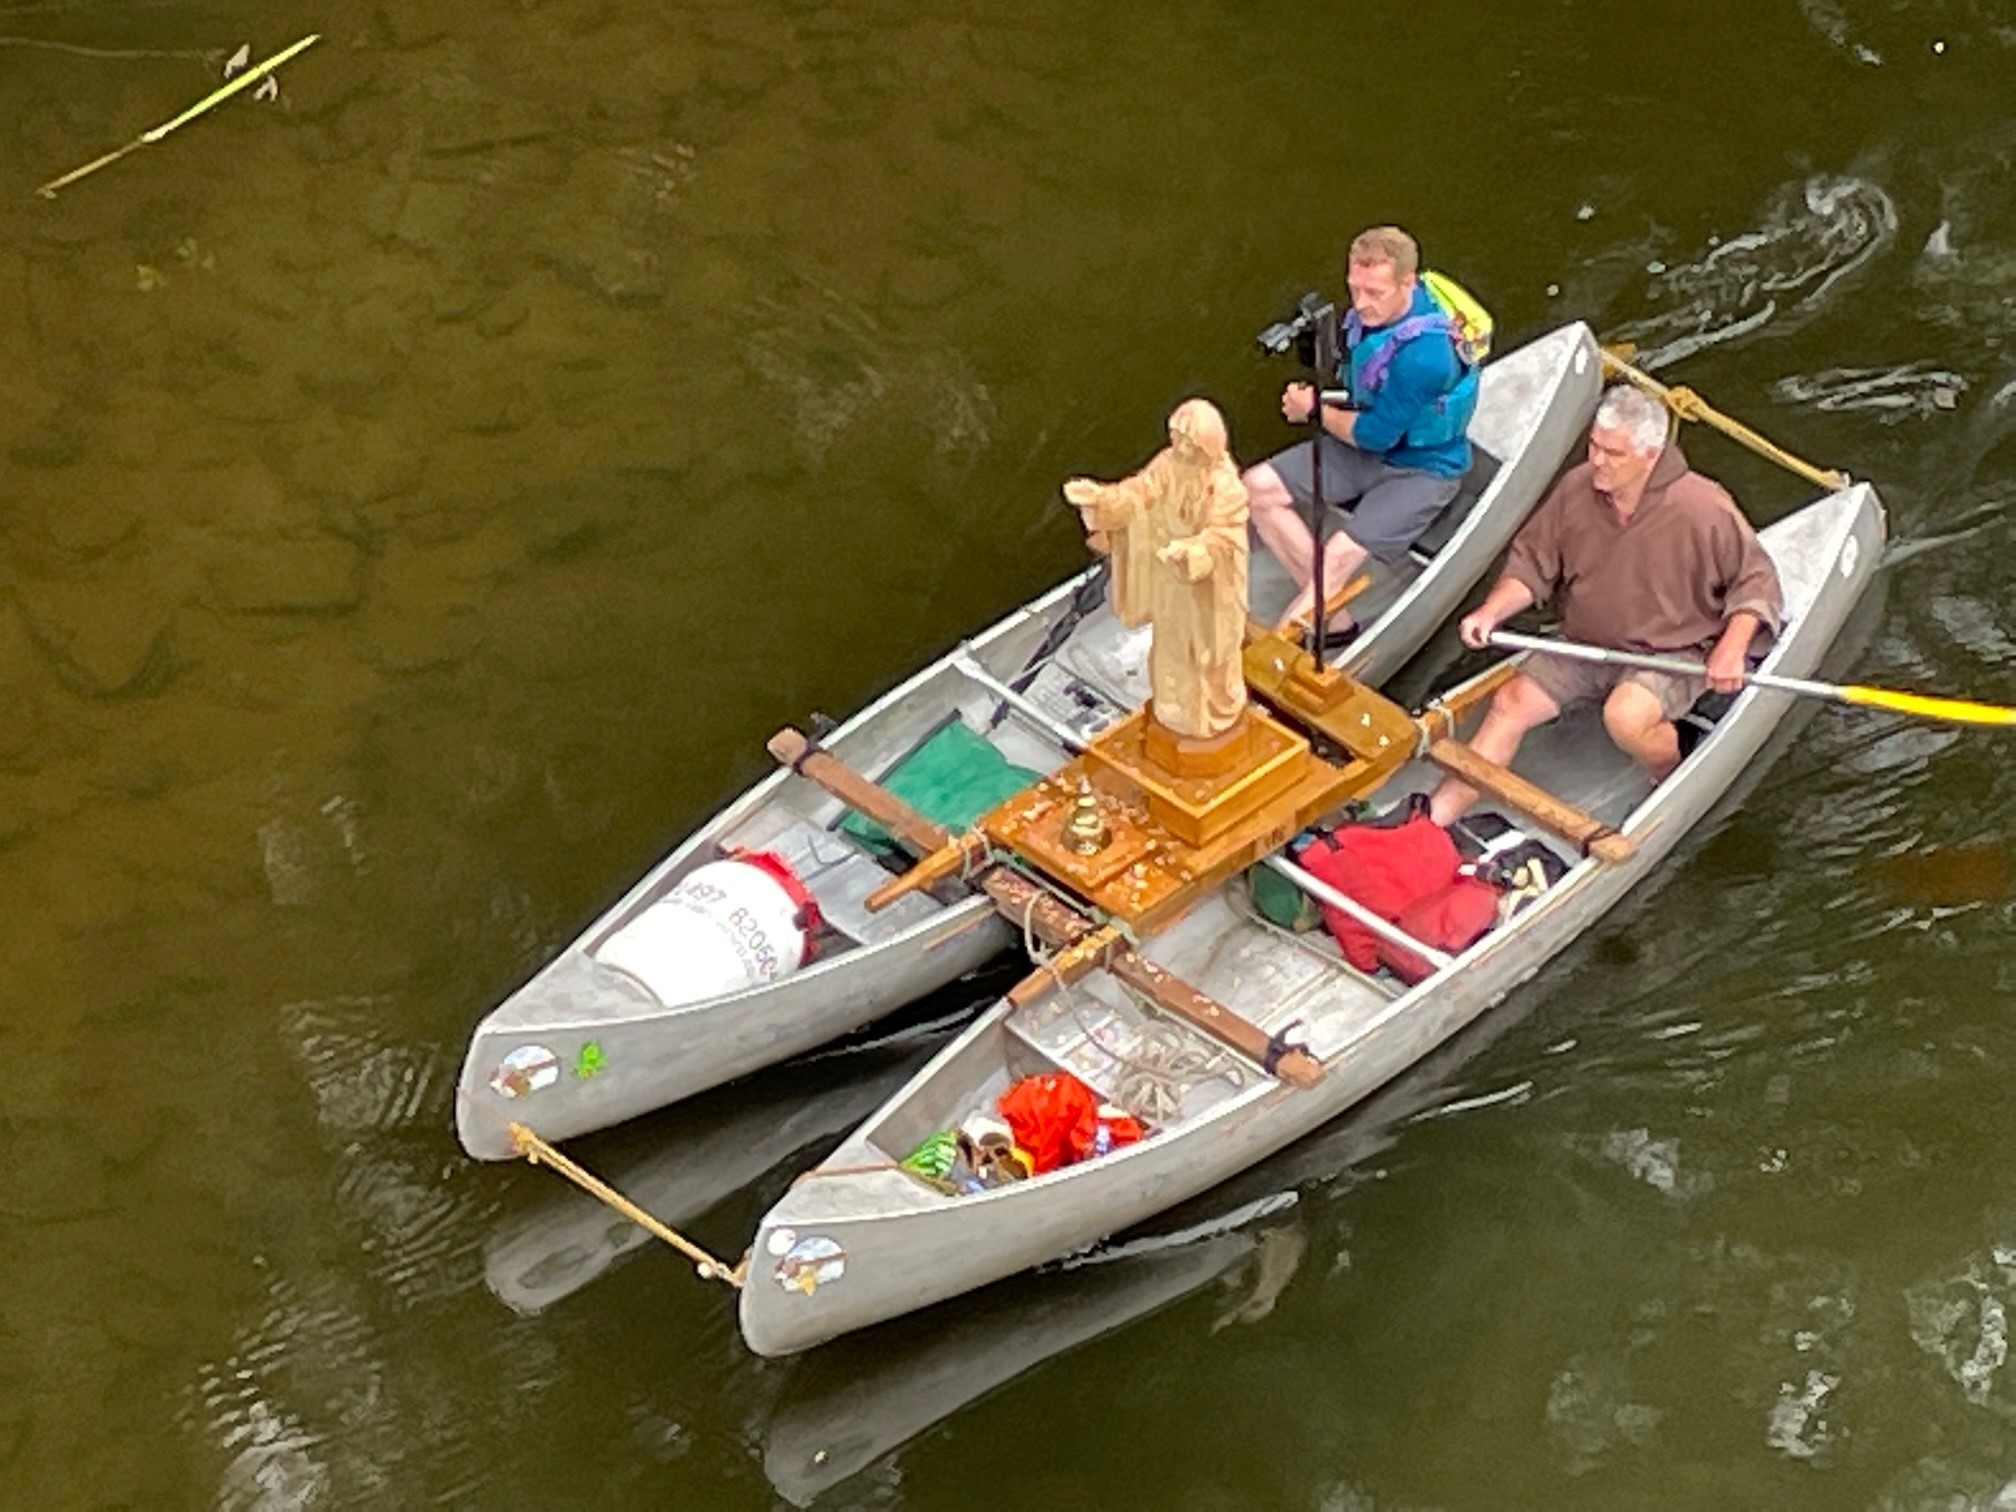 River pilgrimage to raise awarenss of the plight of the Wye. The boat leaves Hay-on-Wye.